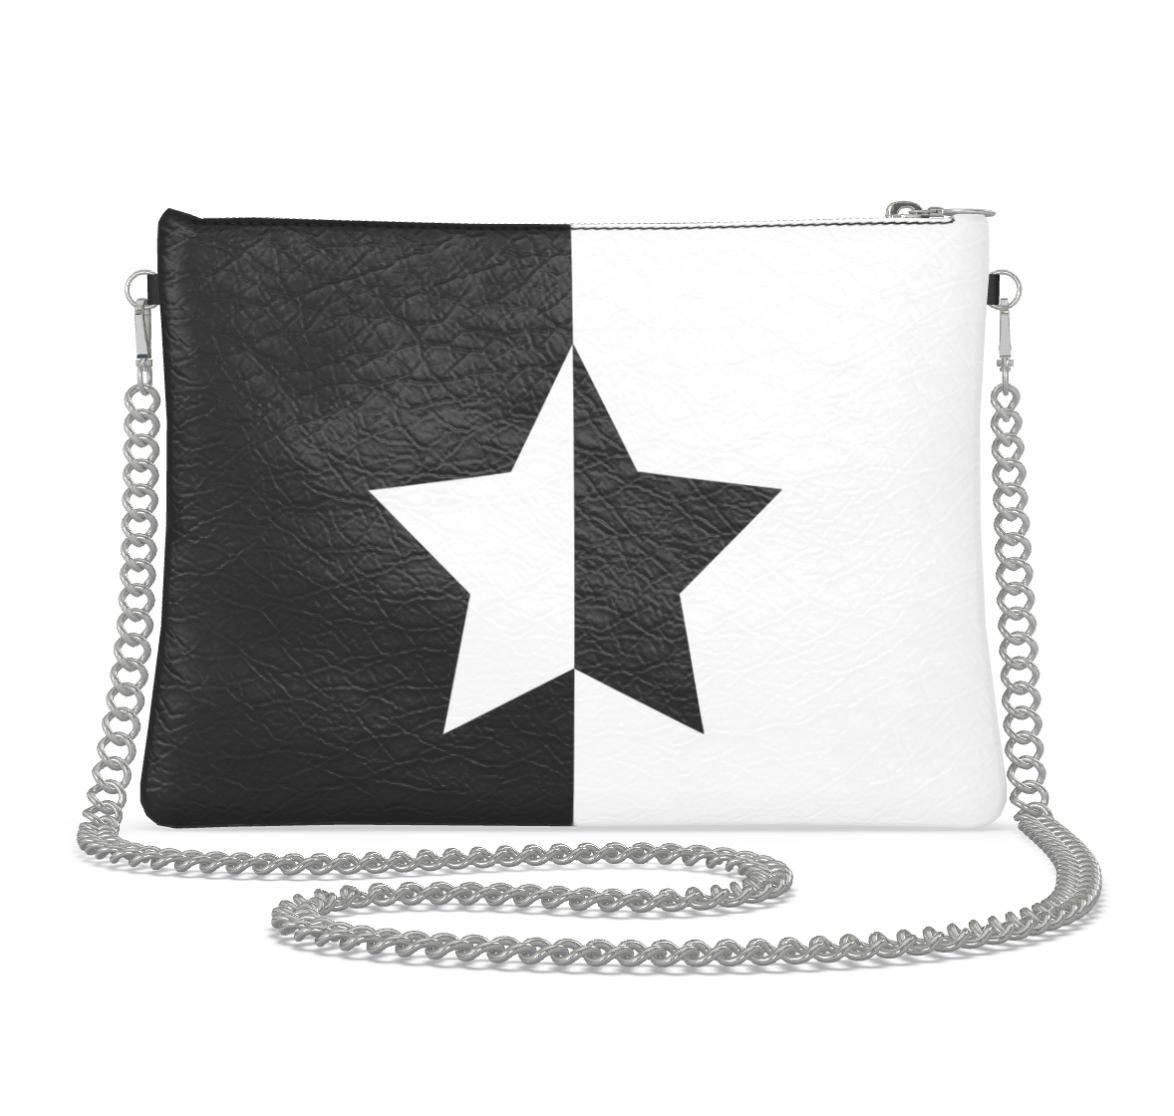 UNTITLED BOUTIQUE Black and White Yin-Yang Leather Star Crossbody Bag with Silver Chain - Limited Edition